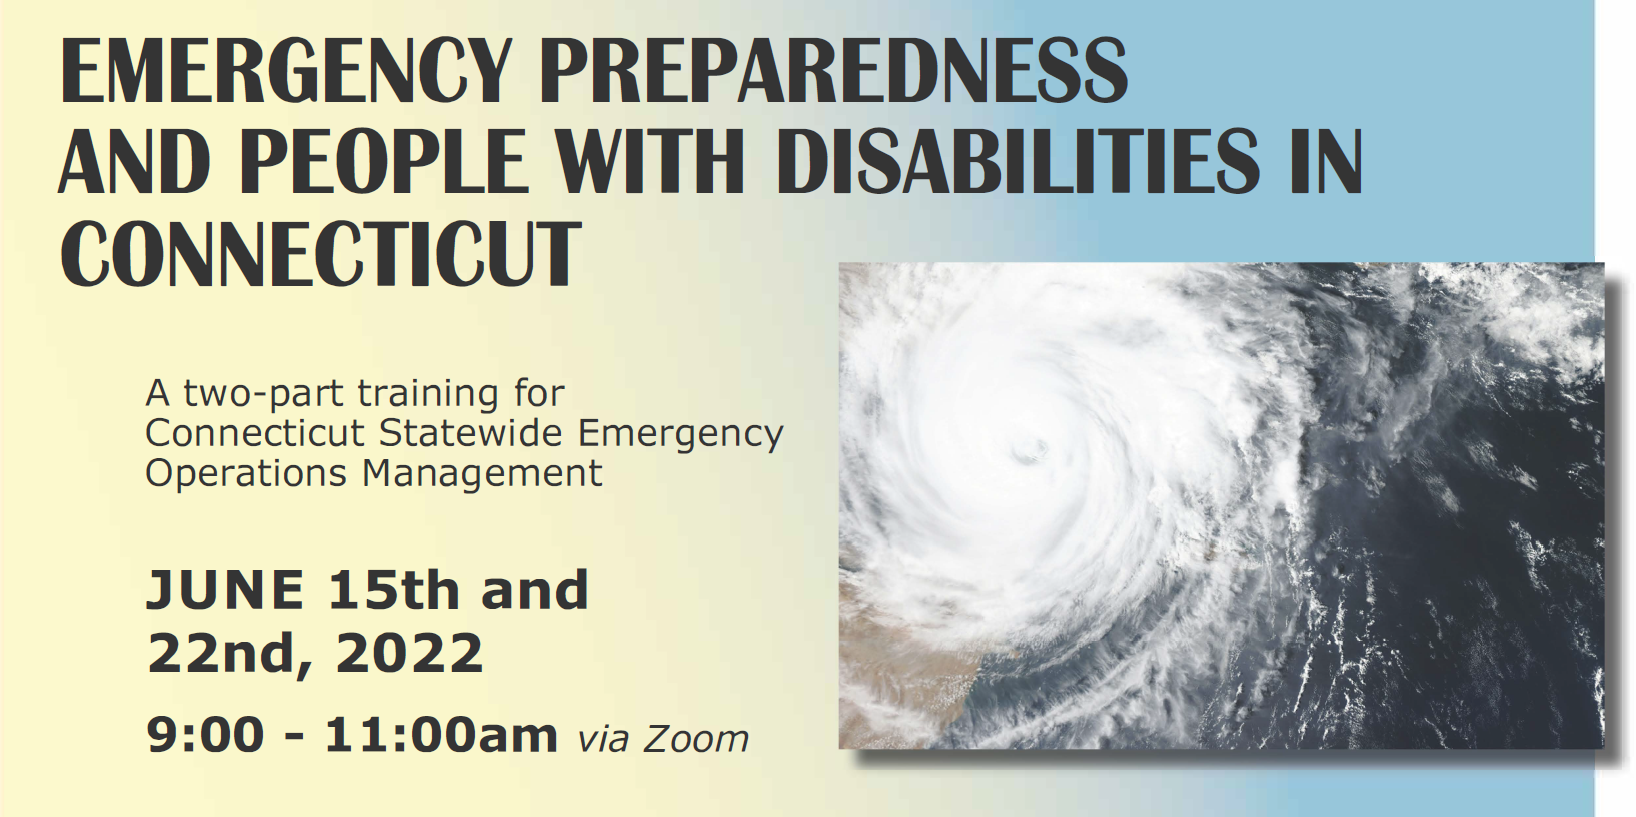 A yellow and blue background, with text: EMERGENCY PREPAREDNESS AND PEOPLE WITH DISABILITIES INCONNECTICUT A two-part training for Connecticut Statewide Emergency Operations Management JUNE 15th and 22nd,2022 9:00 -11:00am via Zoom . To the right of the text is an aerial photo of a swrling white hurrican cloud crossing from a large body of water onto land.